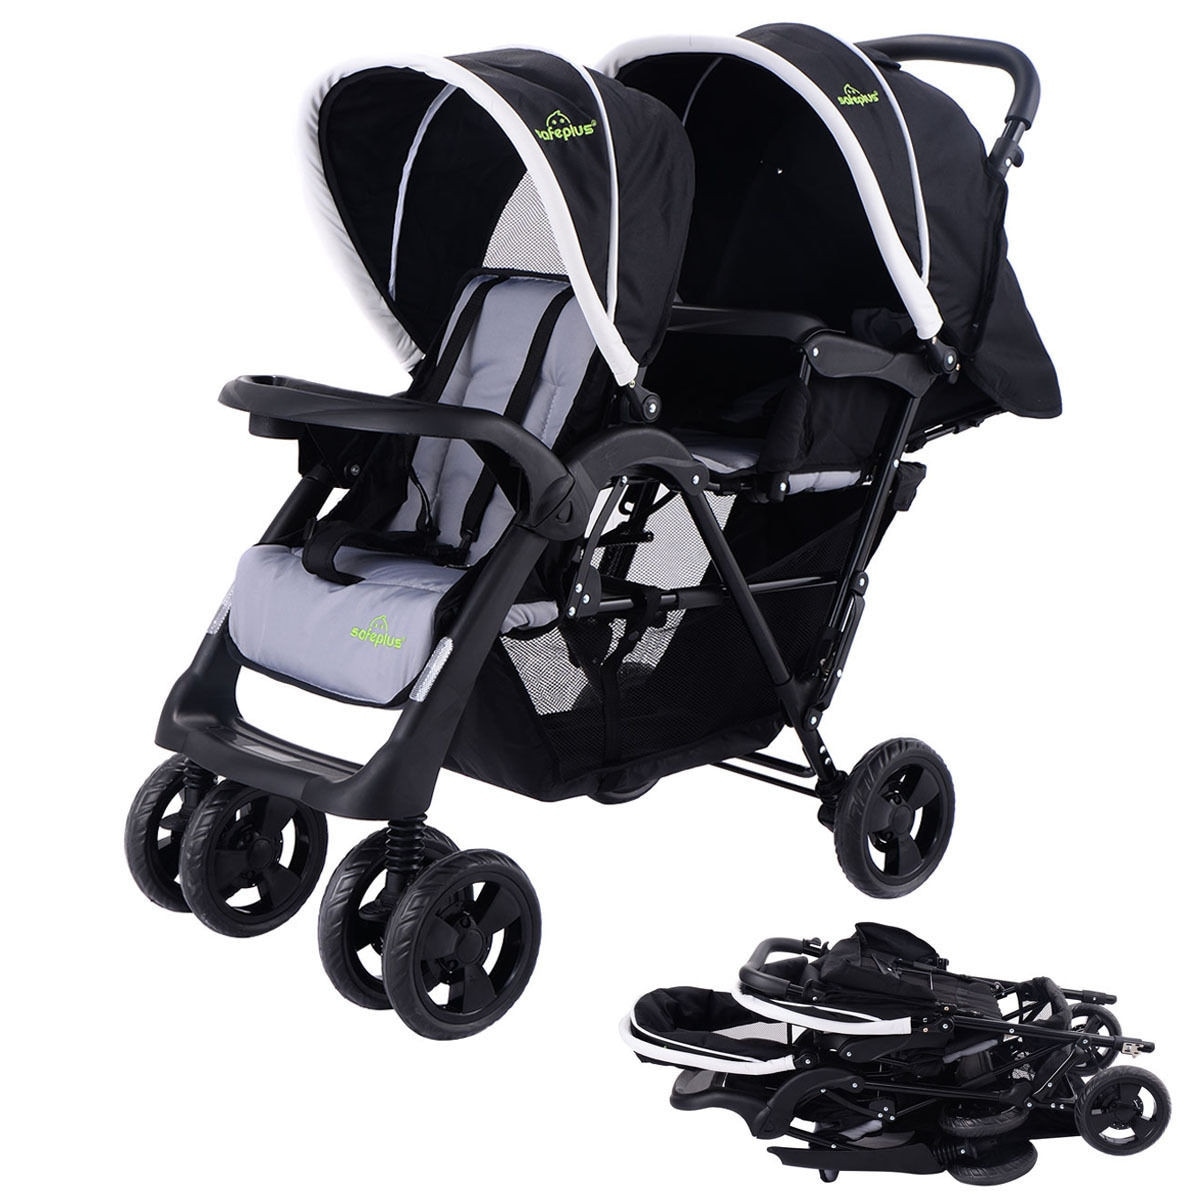 twin baby pushchair